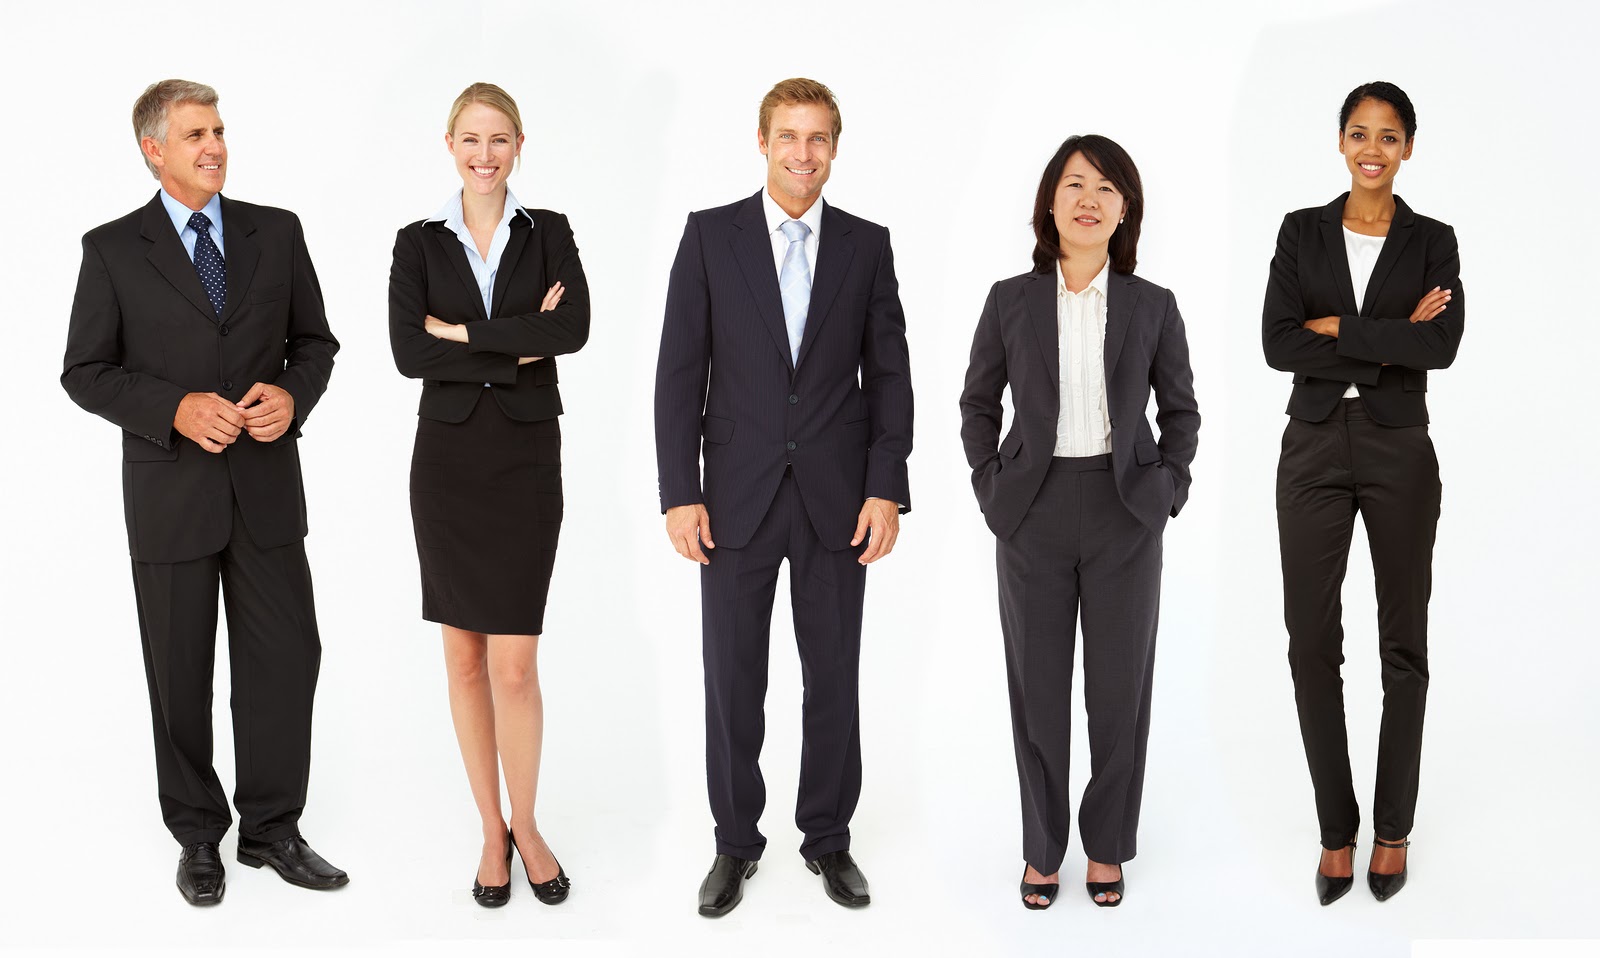 A picture that shows three women and two men standing dressed in appropriate business suits for an article that tells you how to prepare for an interview.